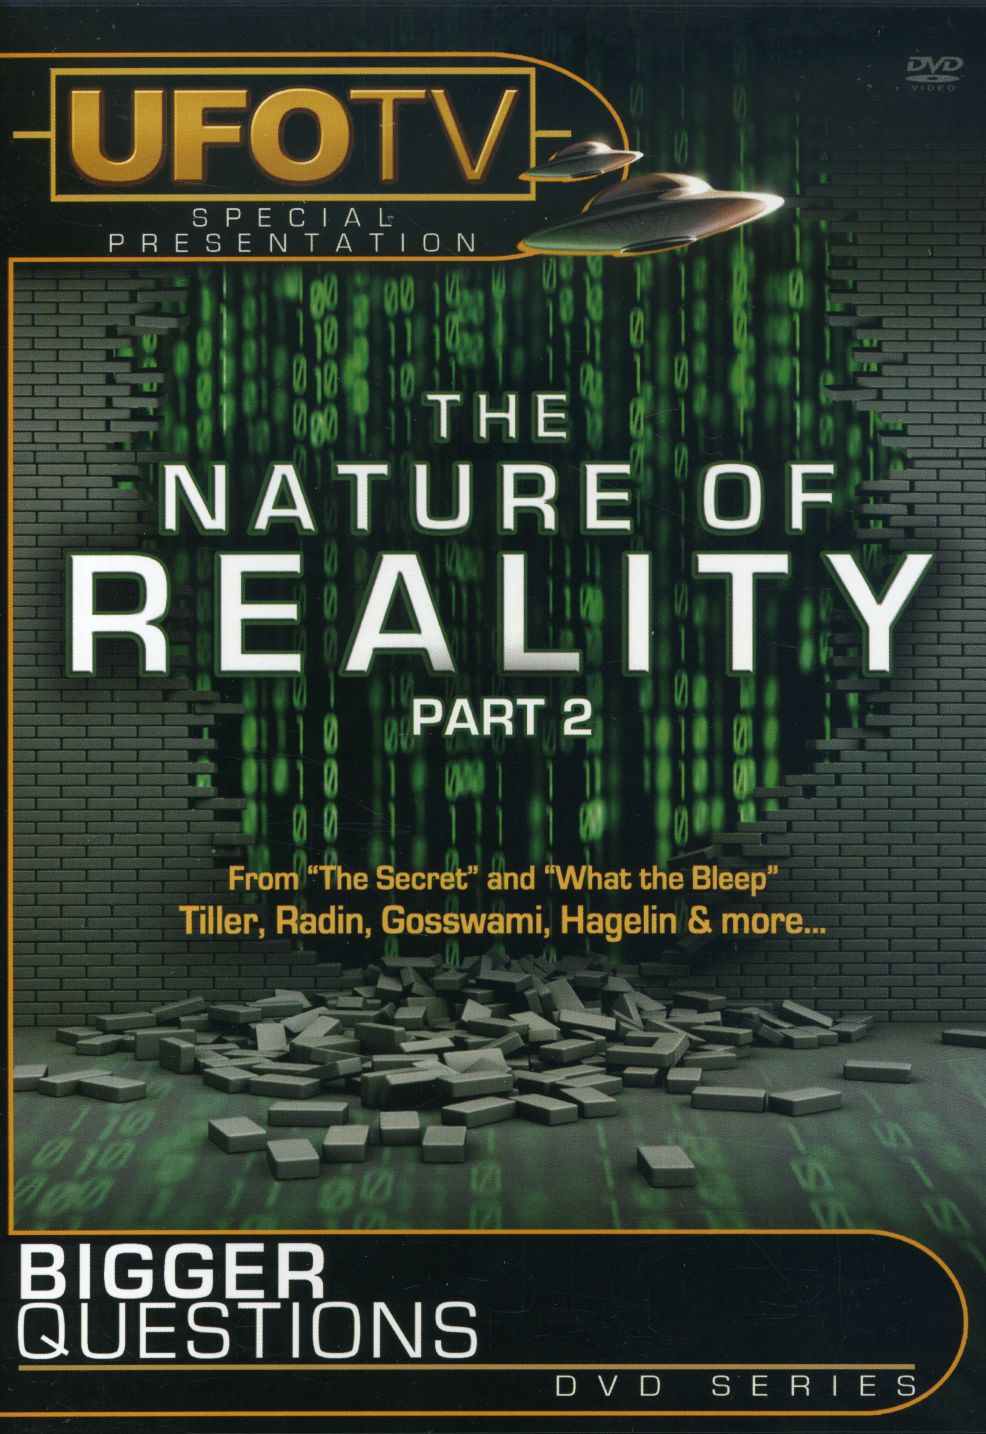 BIGGER QUESTIONS: NATURE OF REALITY